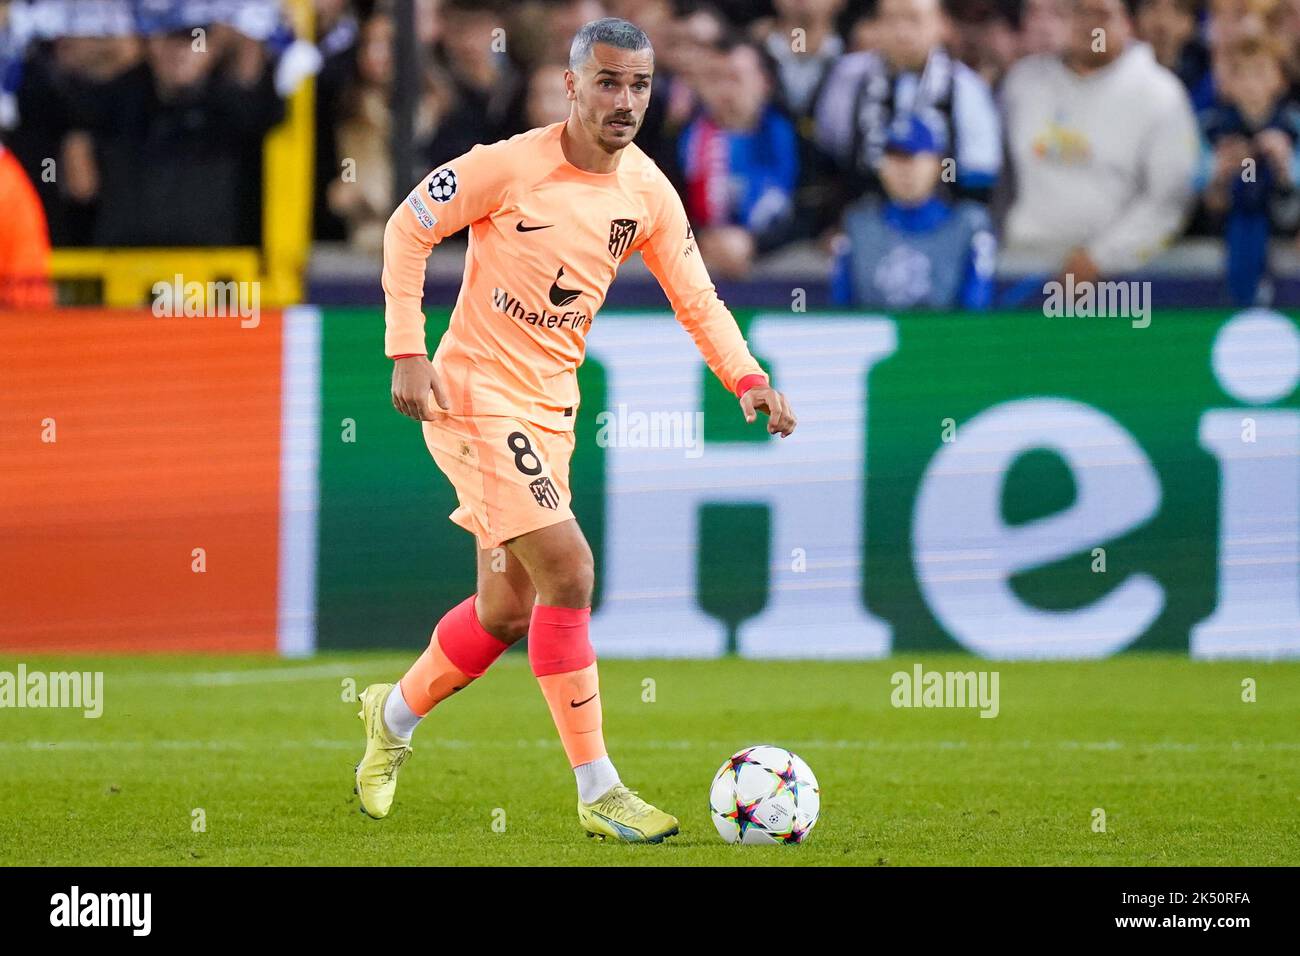 BRUGGES, BELGIUM - OCTOBER 4: Antoine Griezmann of Atletico Madrid runs with the ball during the Group B - UEFA Champions League match between Club Brugge KV and Atletico Madrid at the Jan Breydelstadion on October 4, 2022 in Brugges, Belgium (Photo by Joris Verwijst/Orange Pictures) Stock Photo